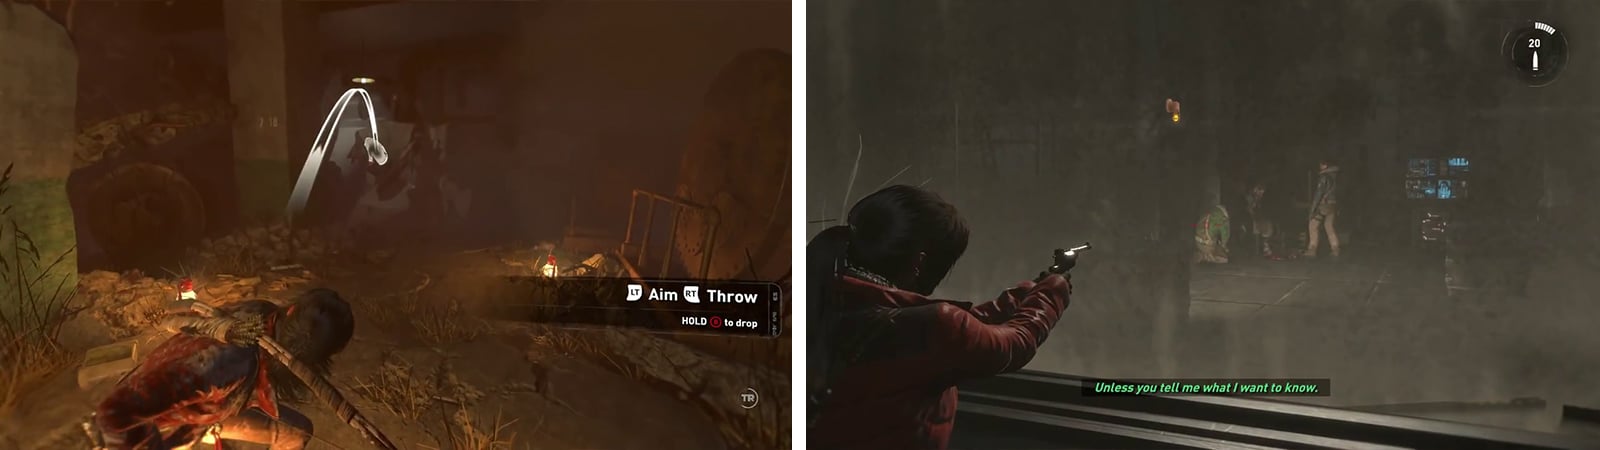 Use a lantern to destroy the canvas blockage (left). In the next room, Lara will grab a gun, use this to shoot the enemies through the glass (right).